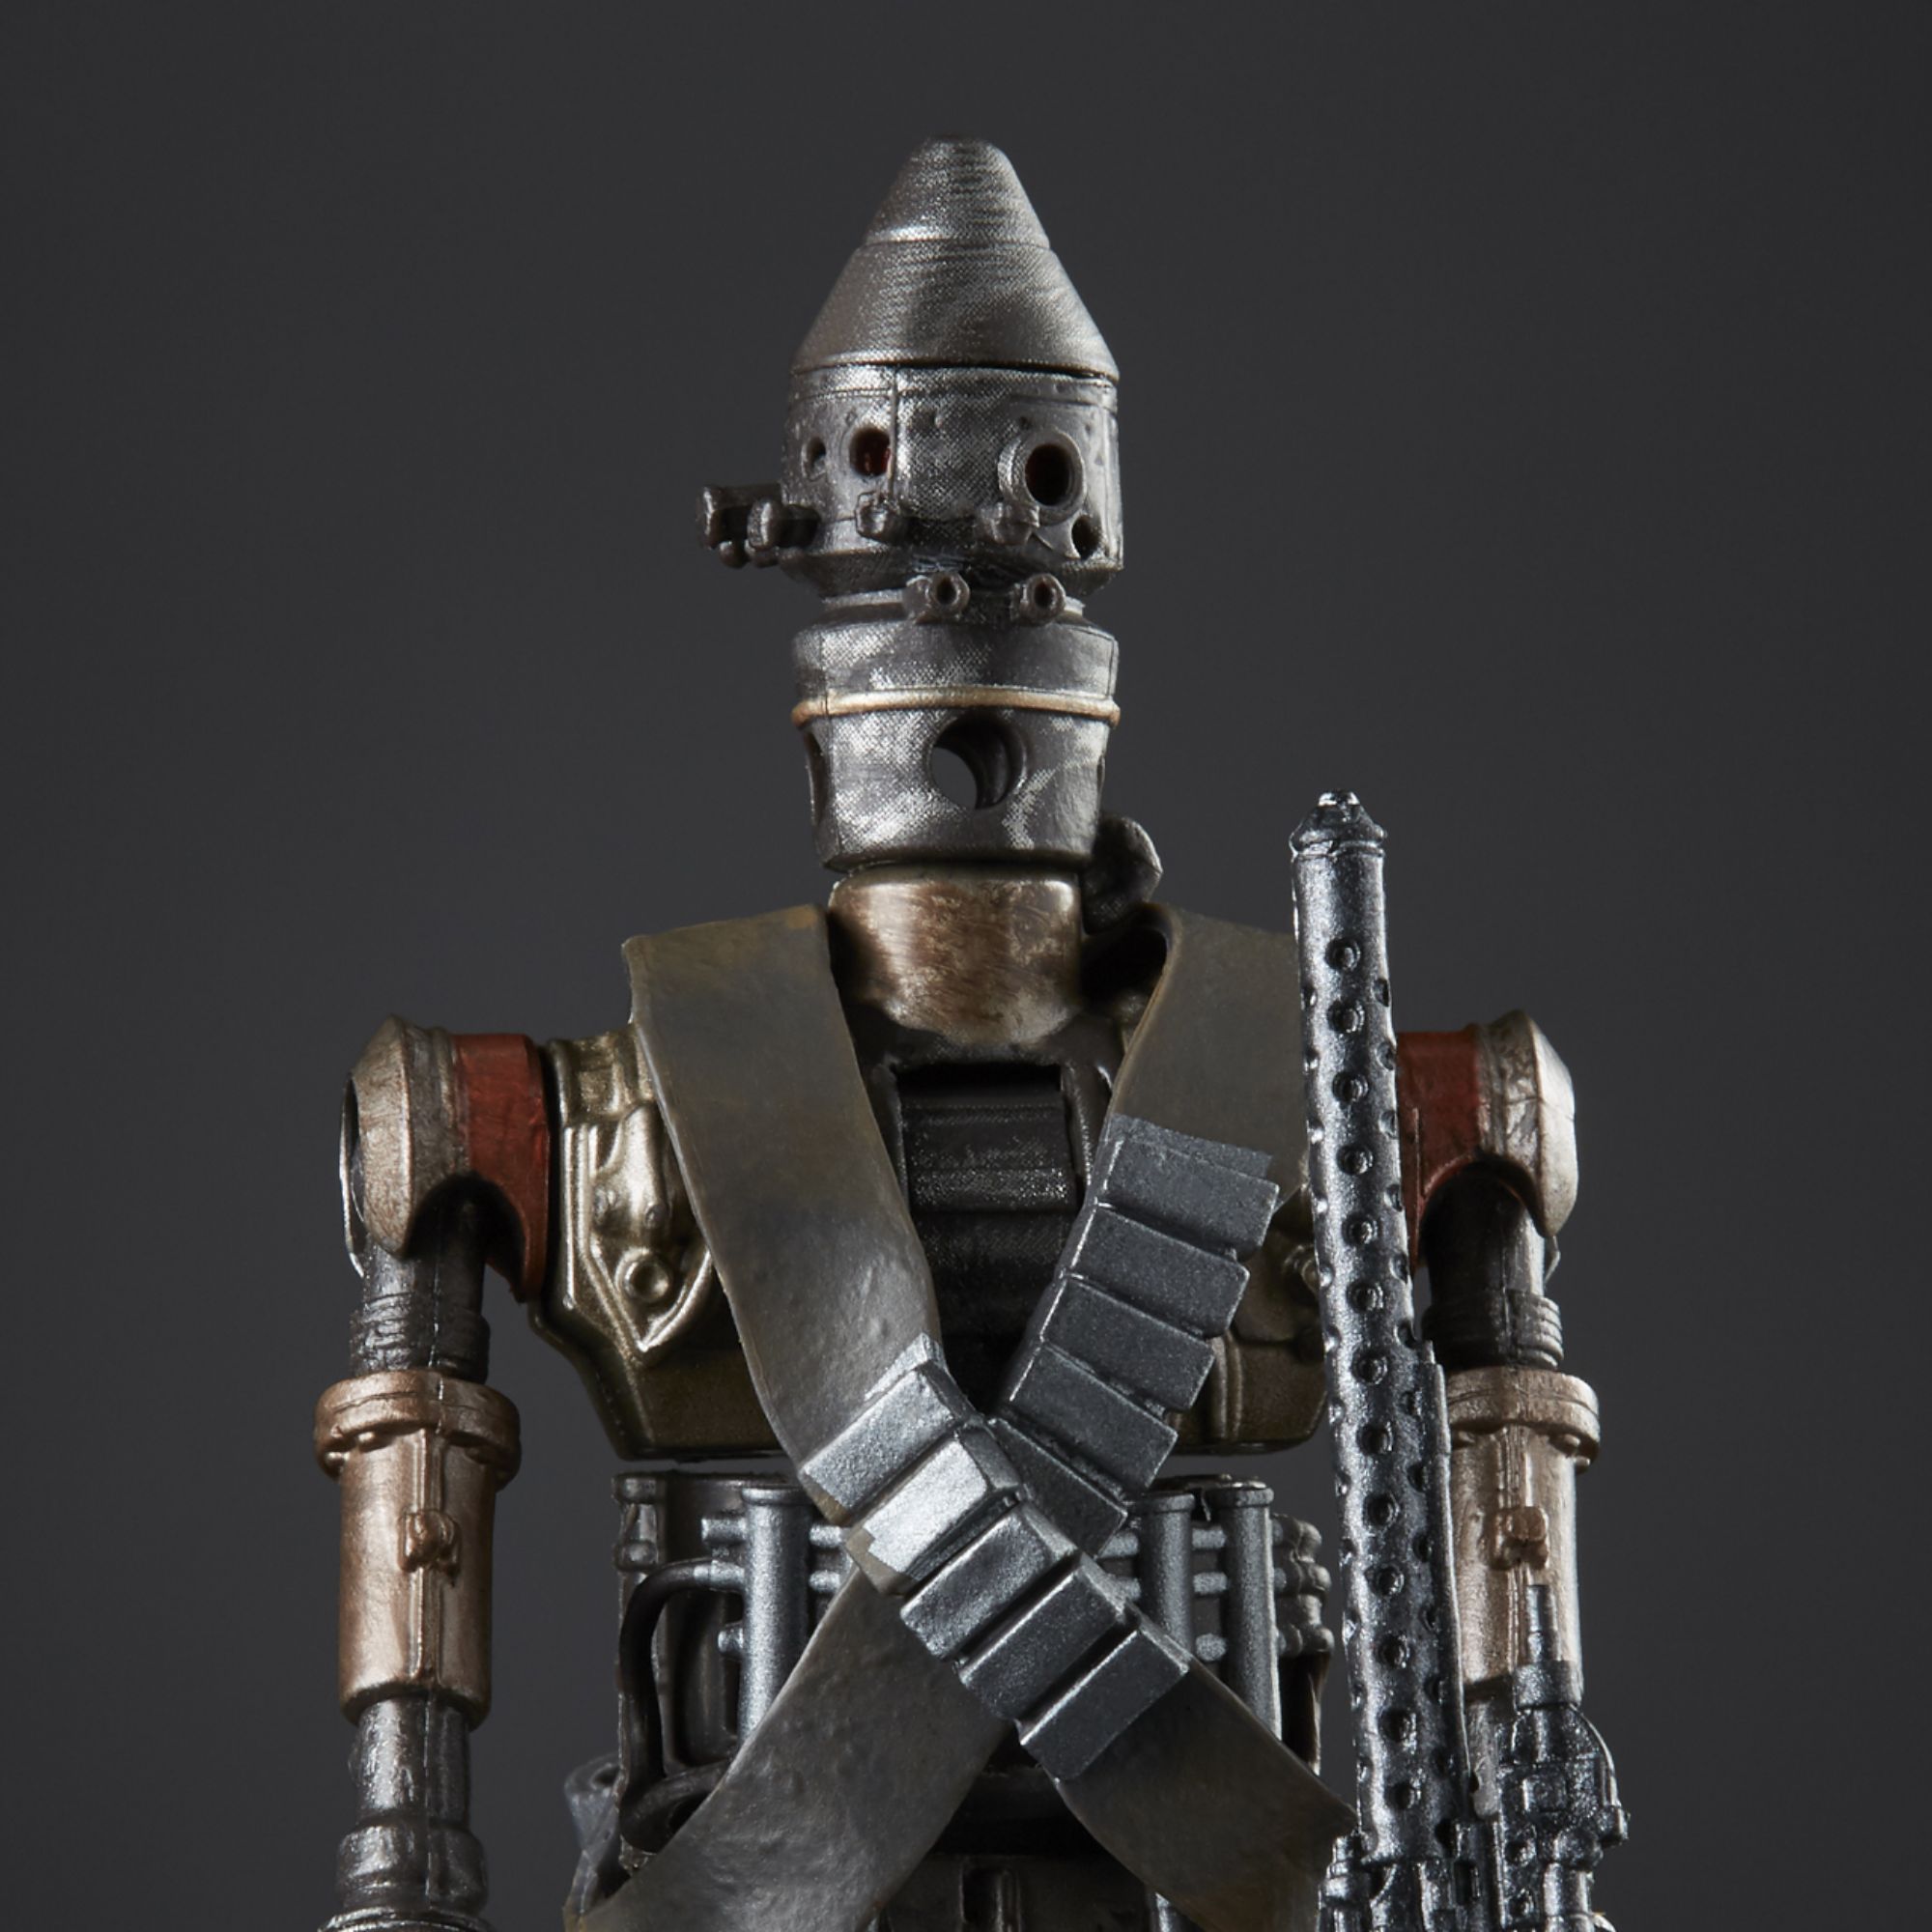 Hasbro E7207 Star Wars The Black Series IG-11 6" Droid Action Figure for sale online 